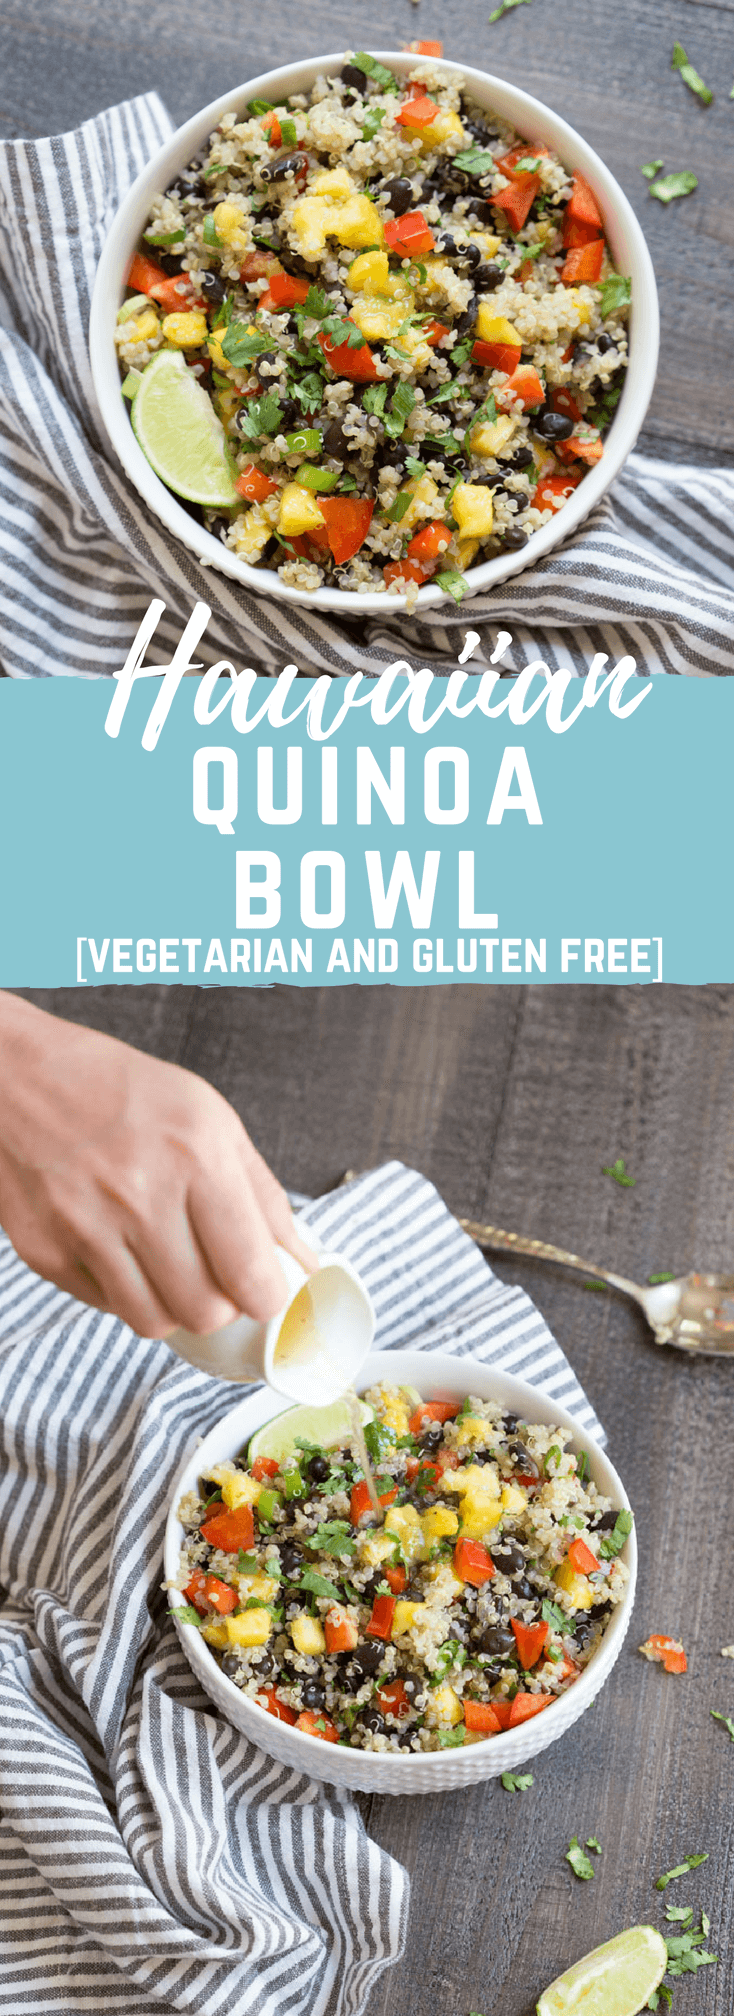 Hawaiian Quinoa Bowl A Vegetarian And Gluten Free Meal Or Side Dish,Two Player Card Games